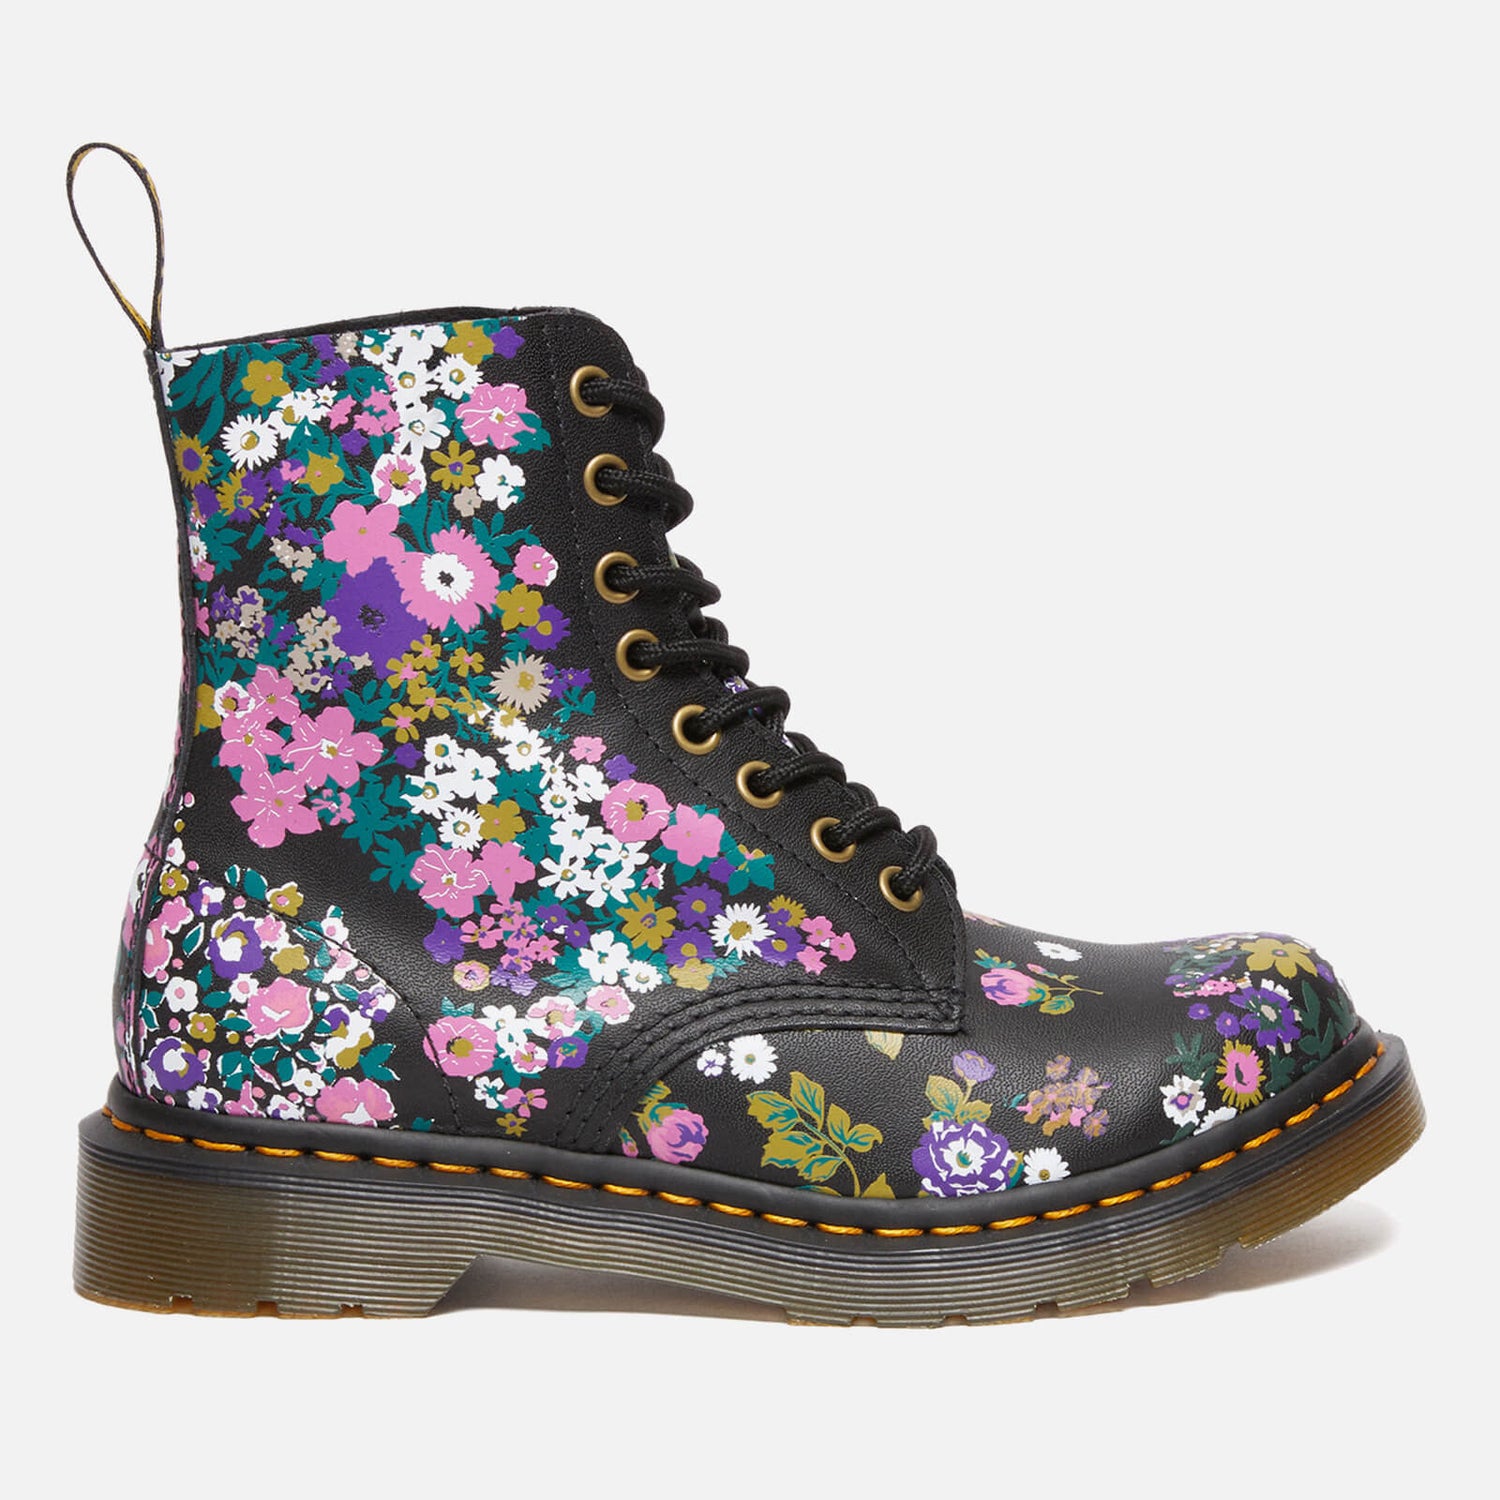 Dr. Martens Women's 1460 Pascal Leather 8-Eye Boots - UK 3